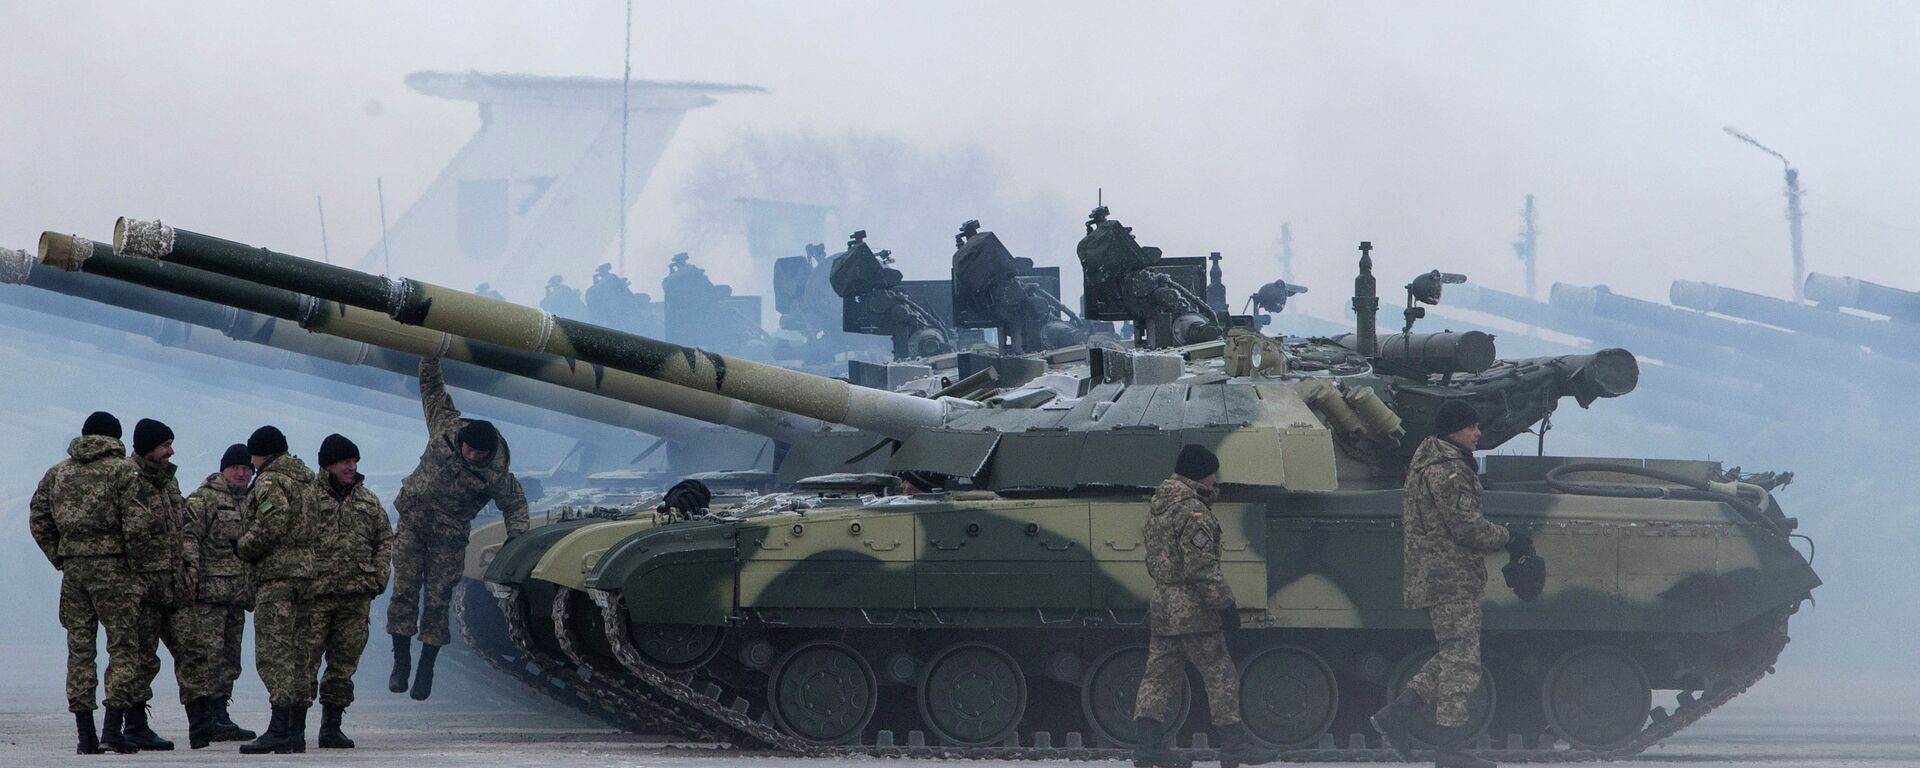 Ukrainian soldiers get new tanks and other military vehicles at a military base in the eastern town of Chuguyev, Ukraine, Saturday, Dec. 6, 2014 - Sputnik International, 1920, 25.12.2021